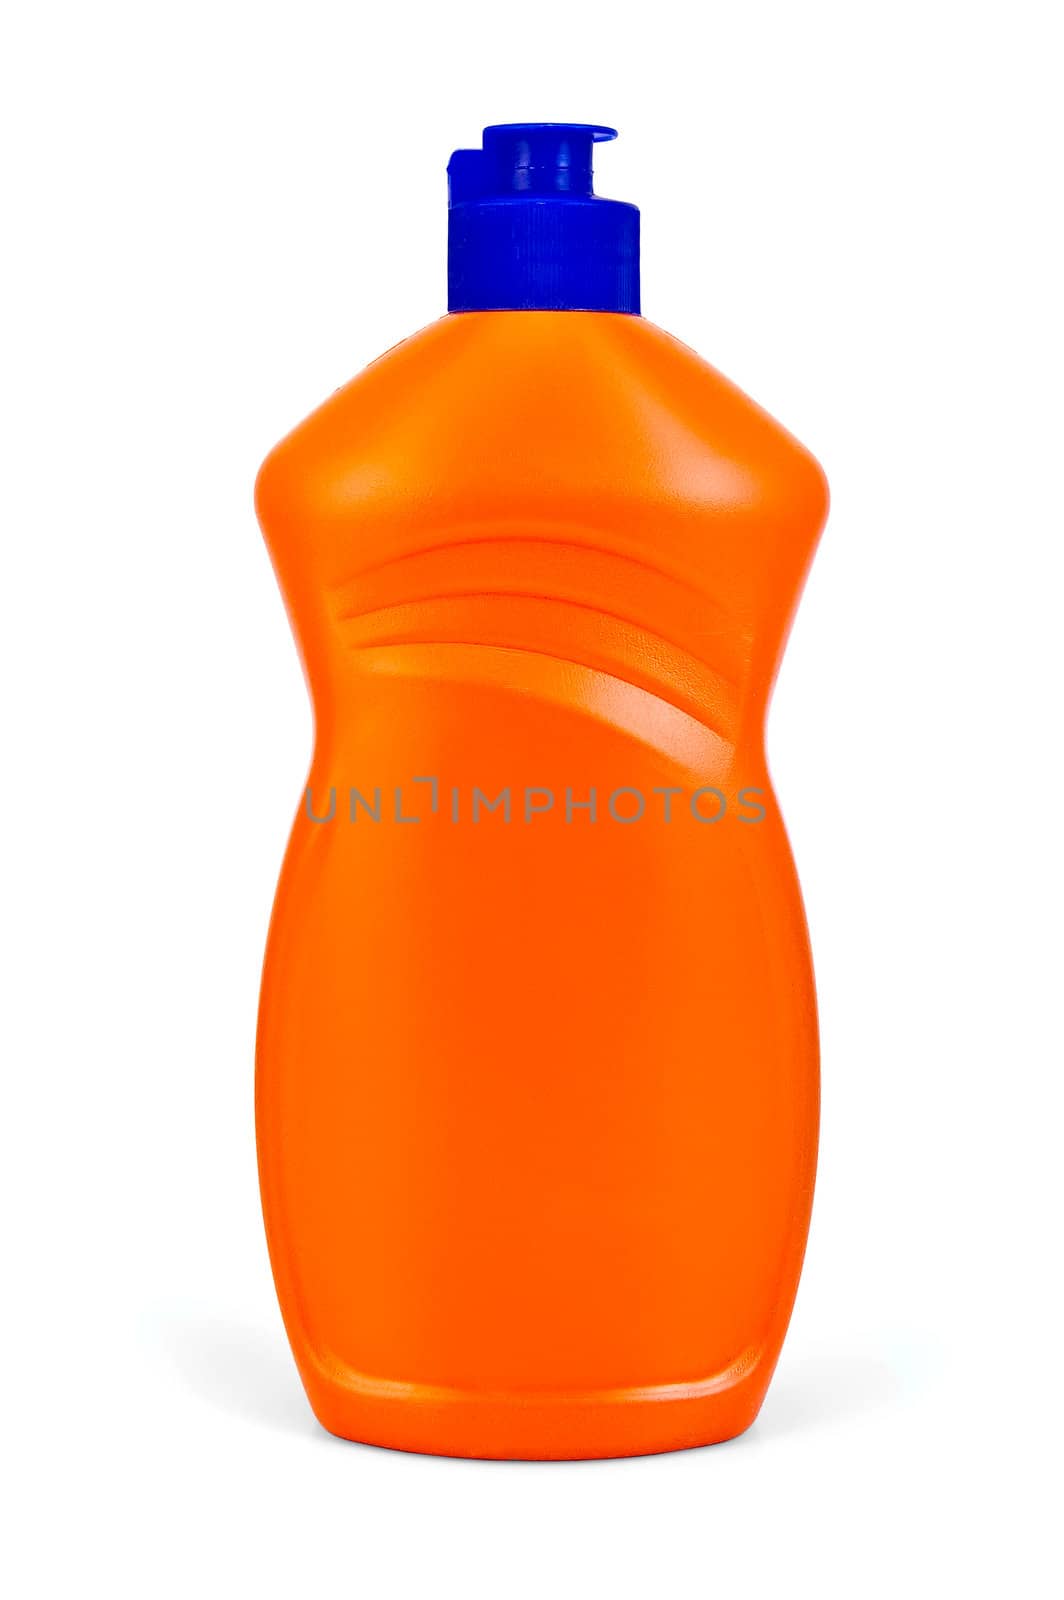 A bottle of orange with detergent isolated on a white background